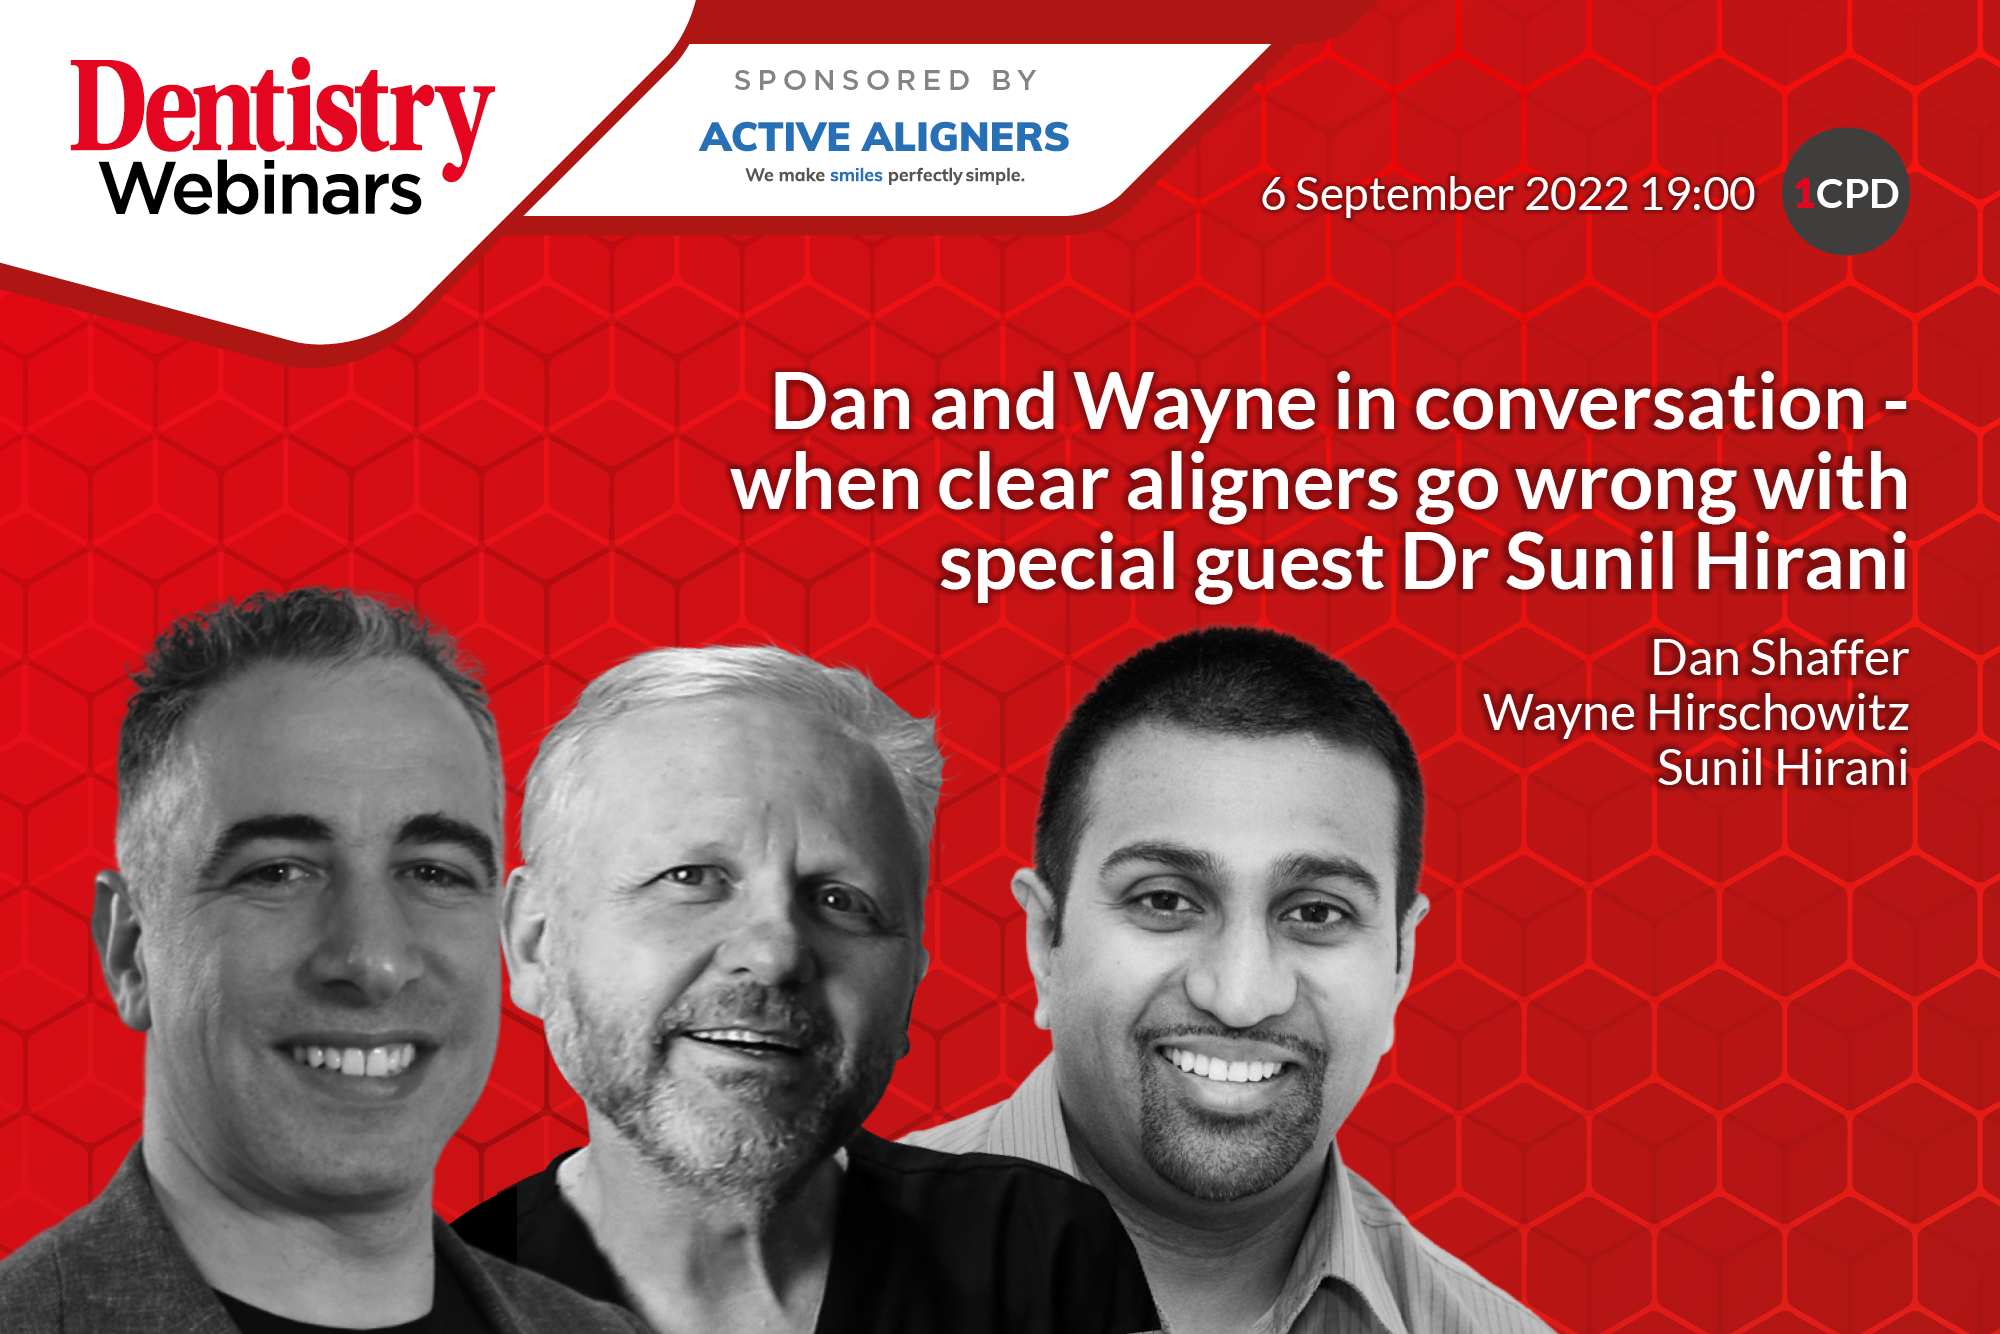 Join Dan Shaffer and Wayne Hirschowitz as they discuss when clear aligners go wrong with Sunil Hirani on 6 September at 7pm.